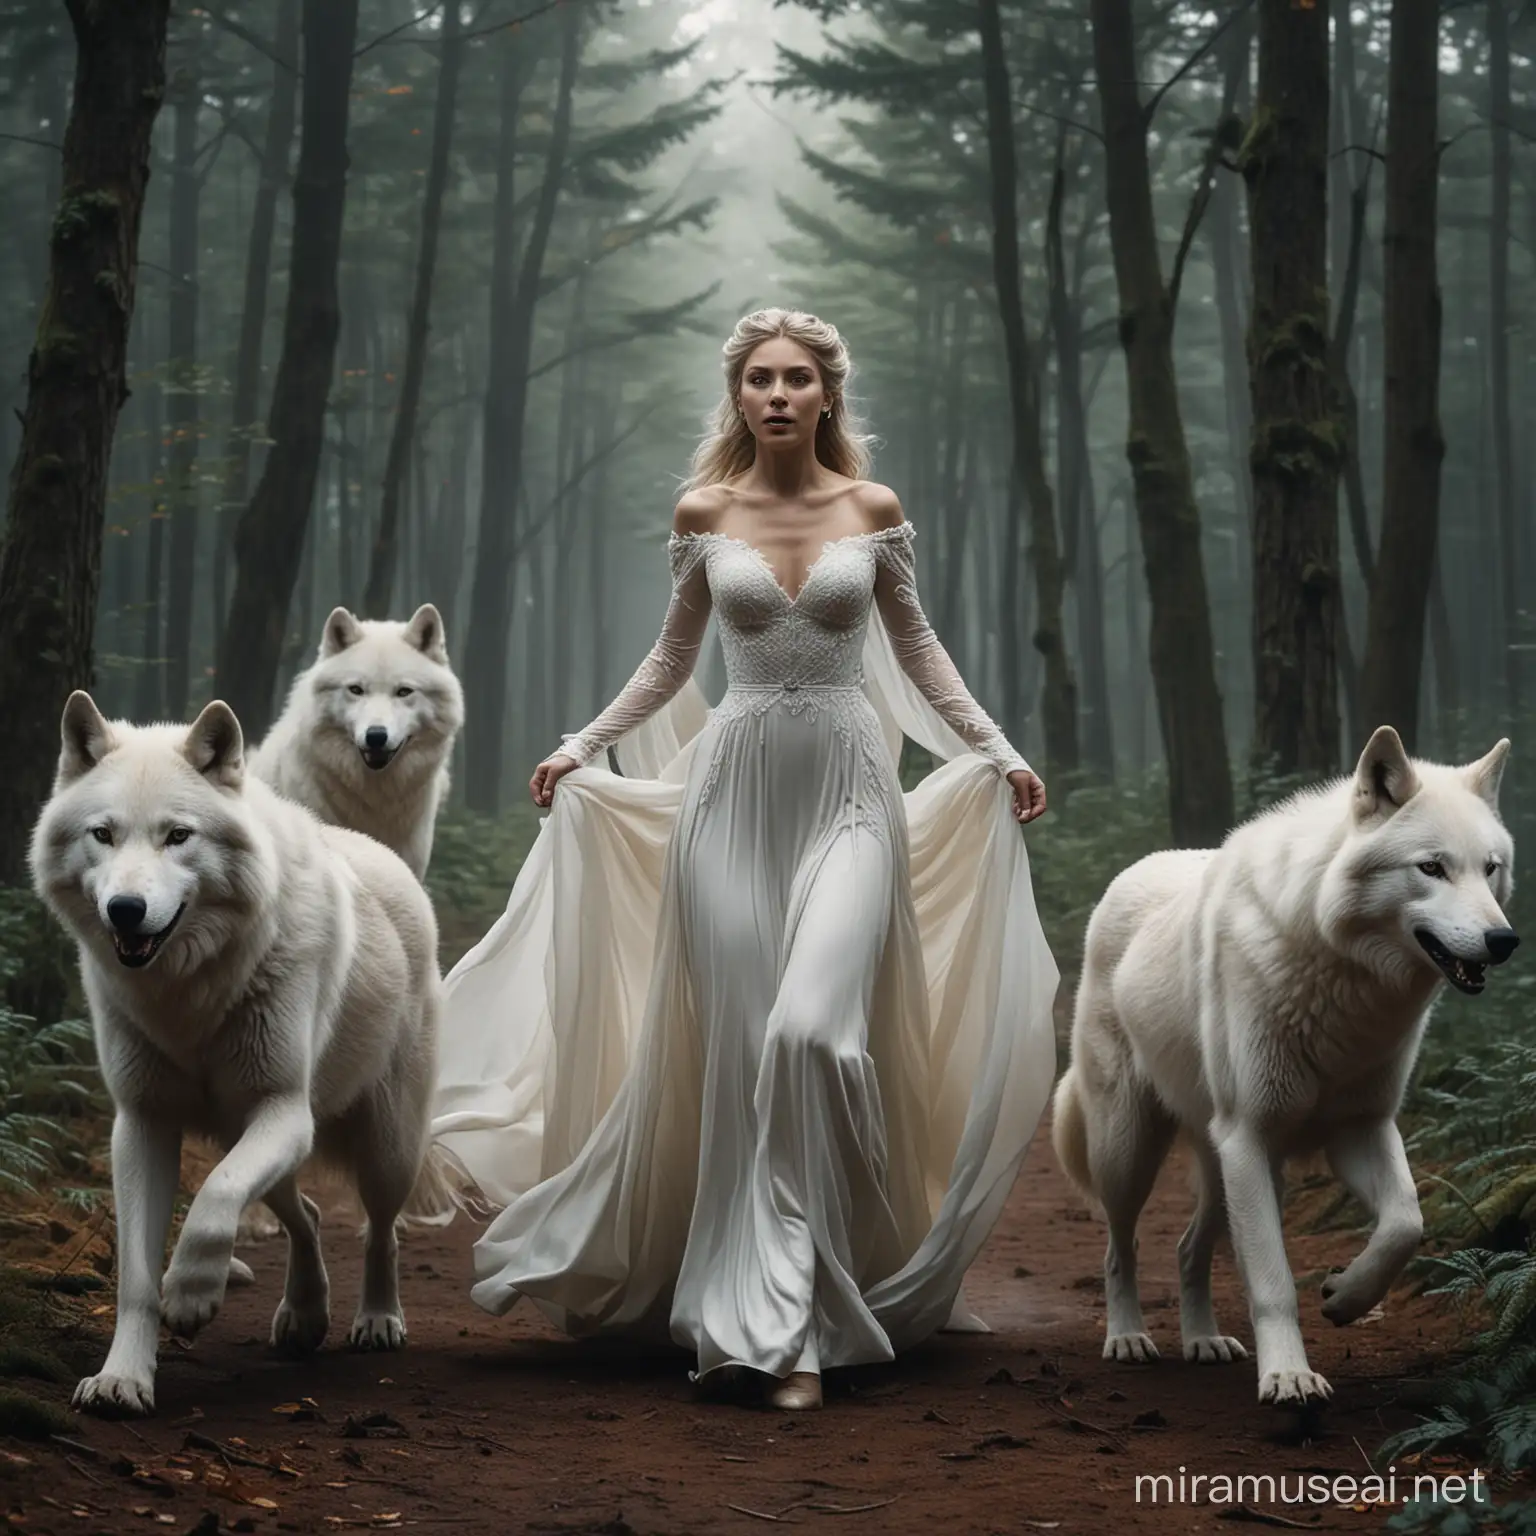 Lady on a wedding gown running in the dark forest being pursued by 3 white wolves
